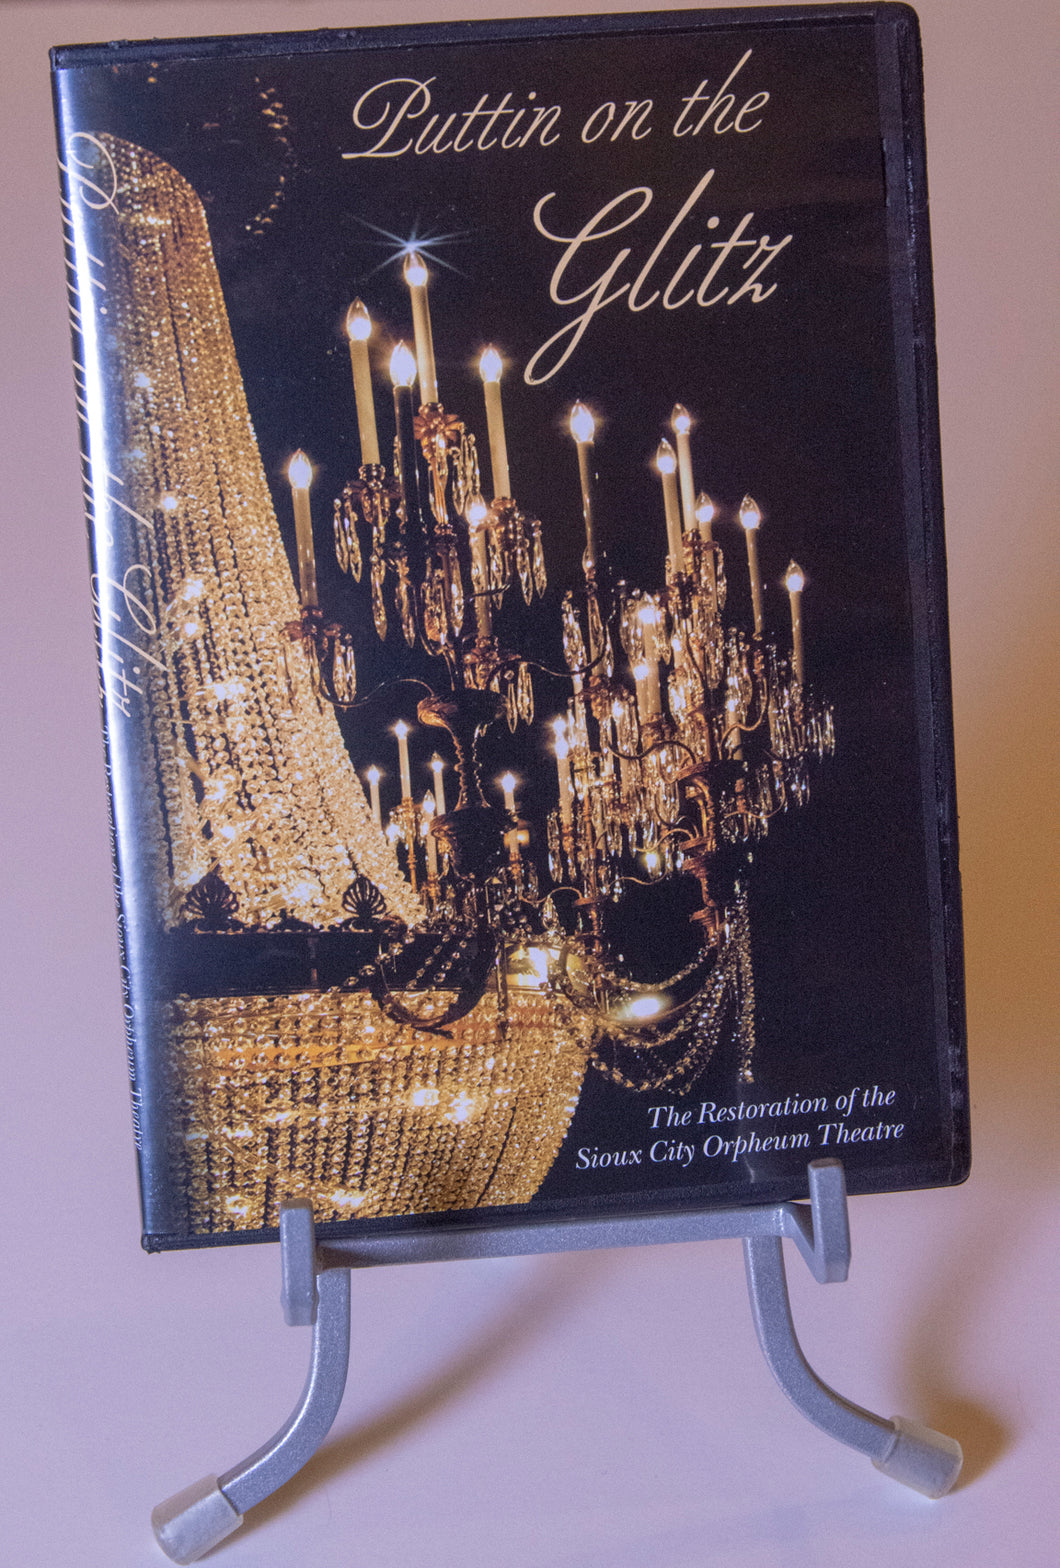 Puttin' on the Glitz, the Restoration of the Sioux City Orpheum Theatre DVD